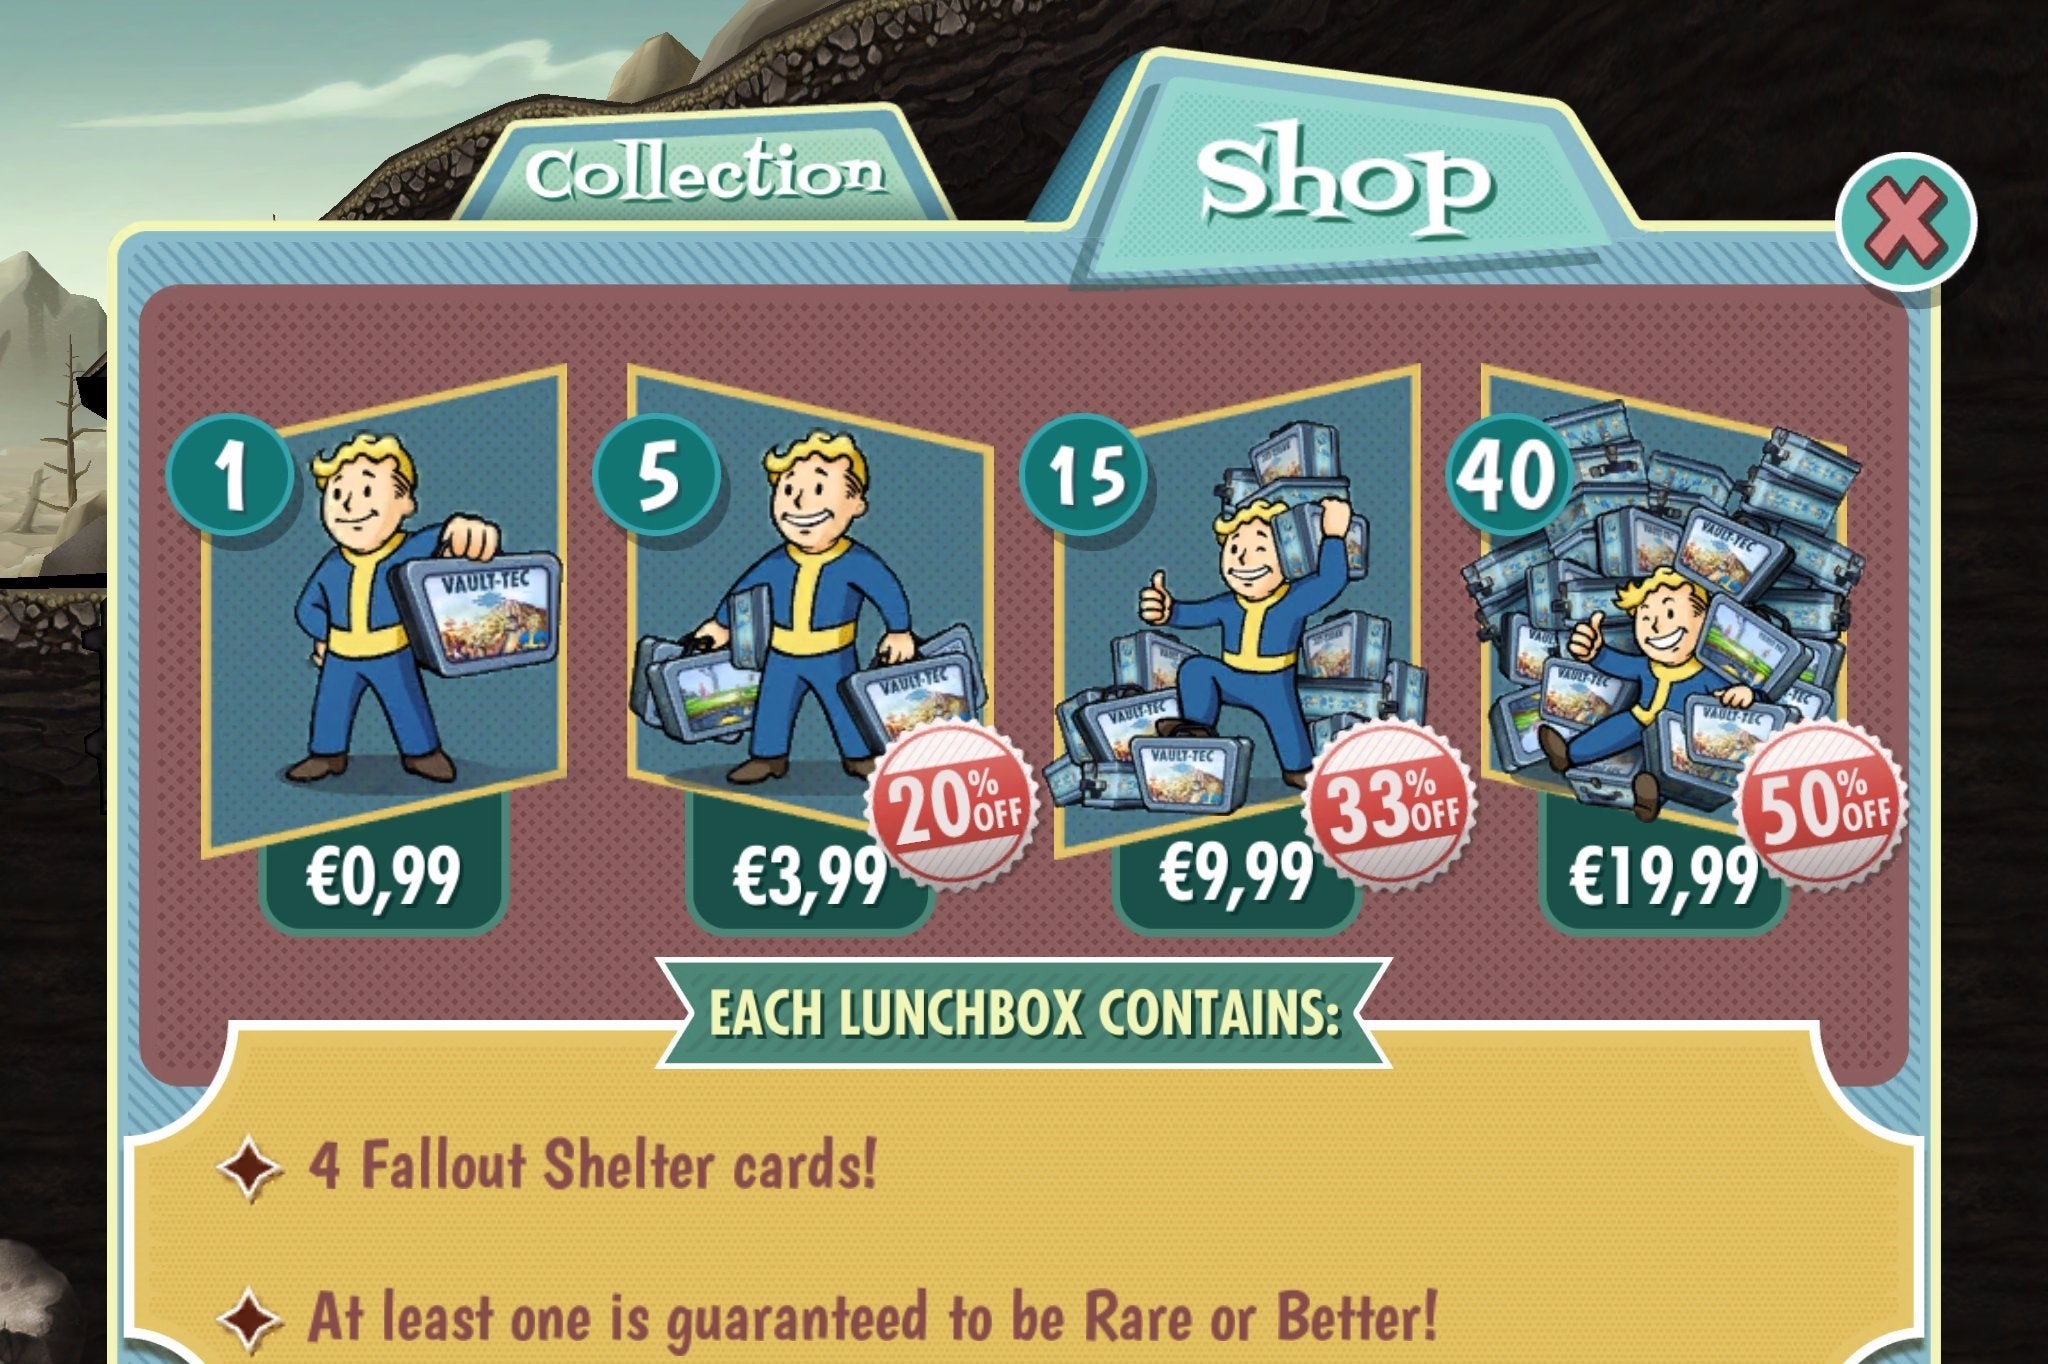 Image for Fallout Shelter making more money than Candy Crush Saga on the App Store